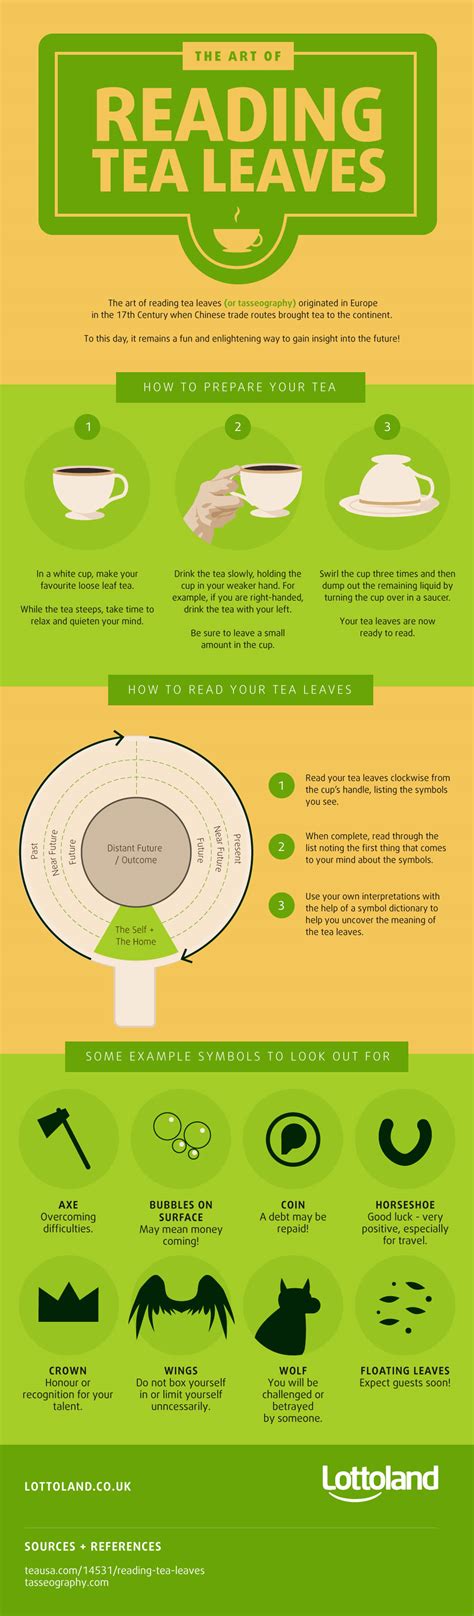 How To Read Tea Leaves Tasseography A Beginner S Guide Lottoland Uk Tea Reading Tea